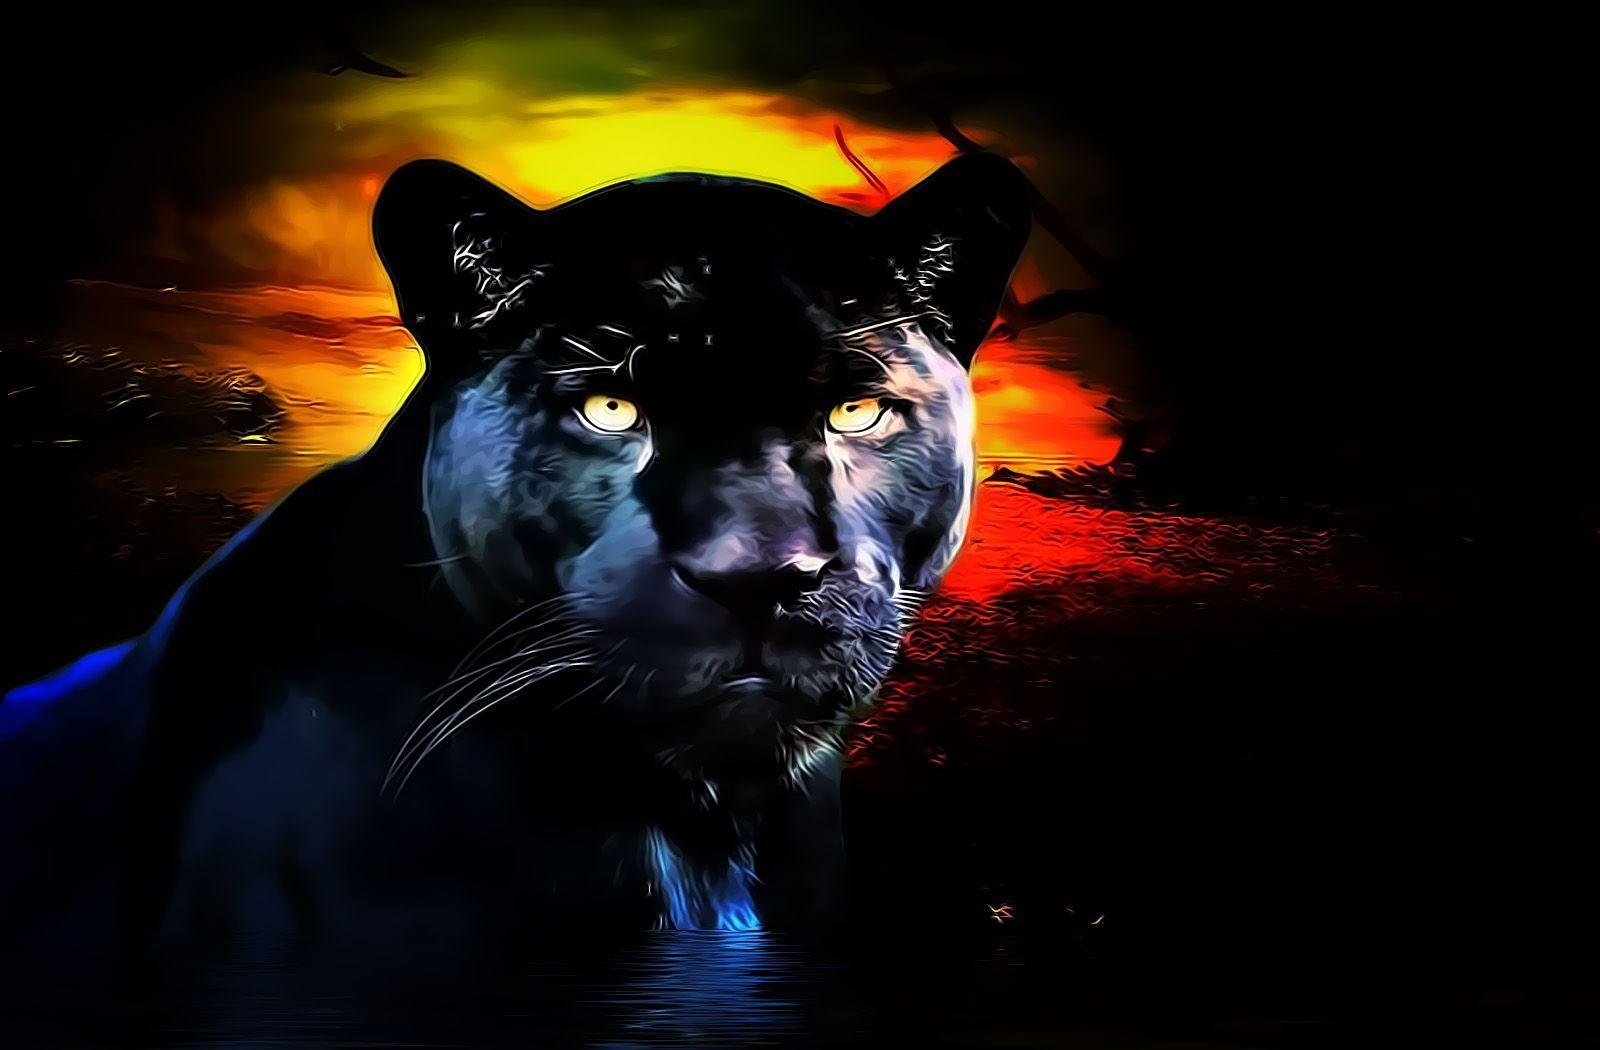 Cool Panther Wallpapers - Top Free Cool Panther Backgrounds